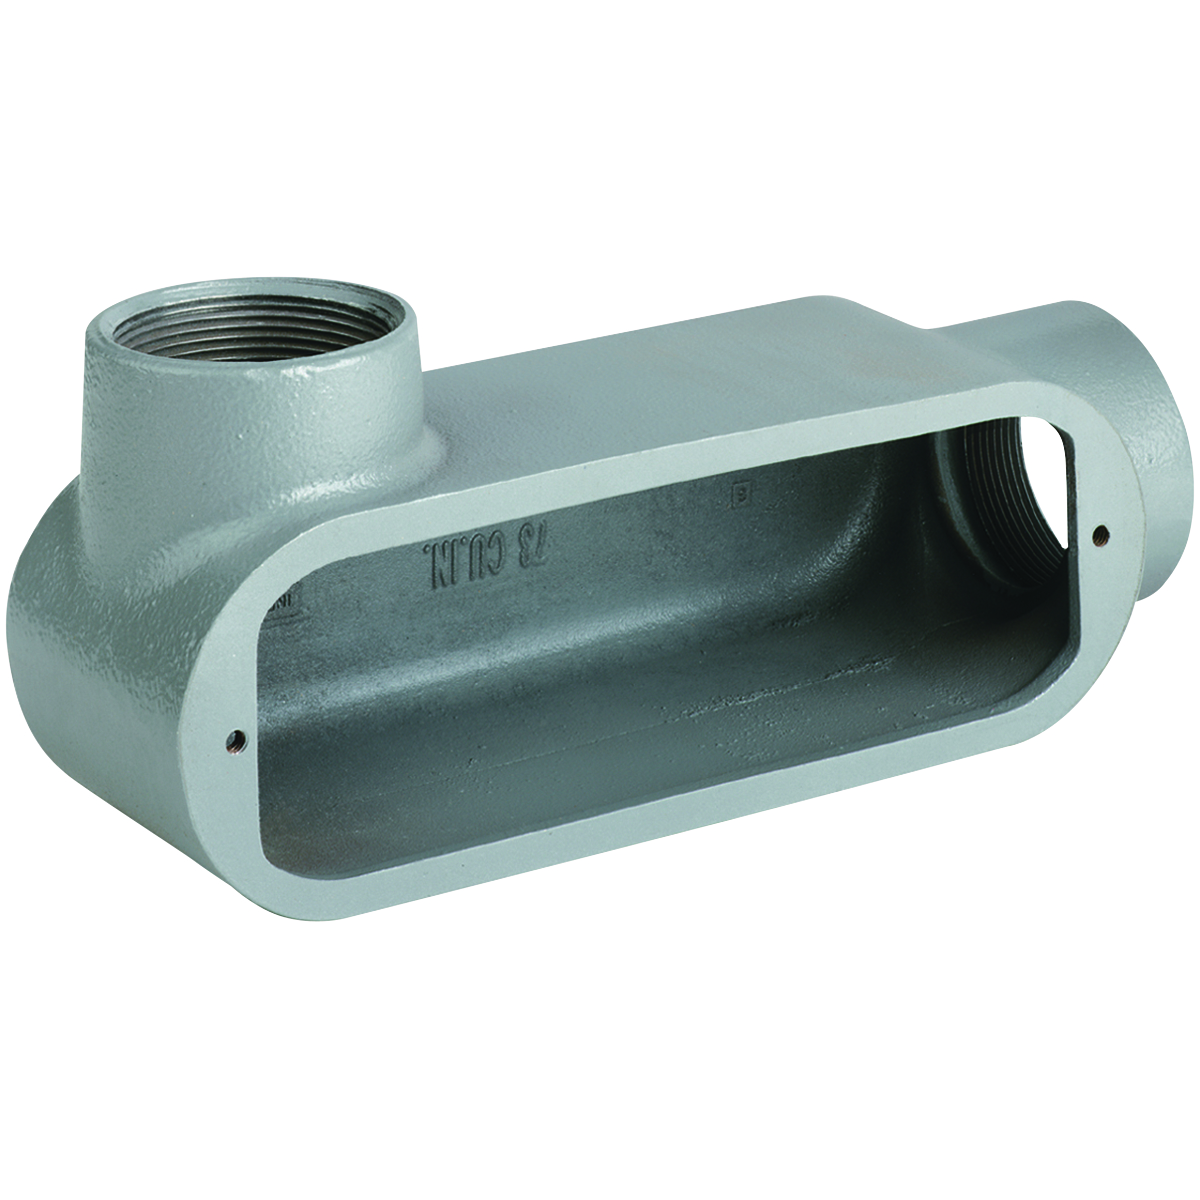 O SERIES/DURALOY 5 SERIES - MALLEABLE IRON CONDUIT BODY - LL TYPE - HUBSIZE 2 INCH - VOLUME 70.0 CUBIC INCHES